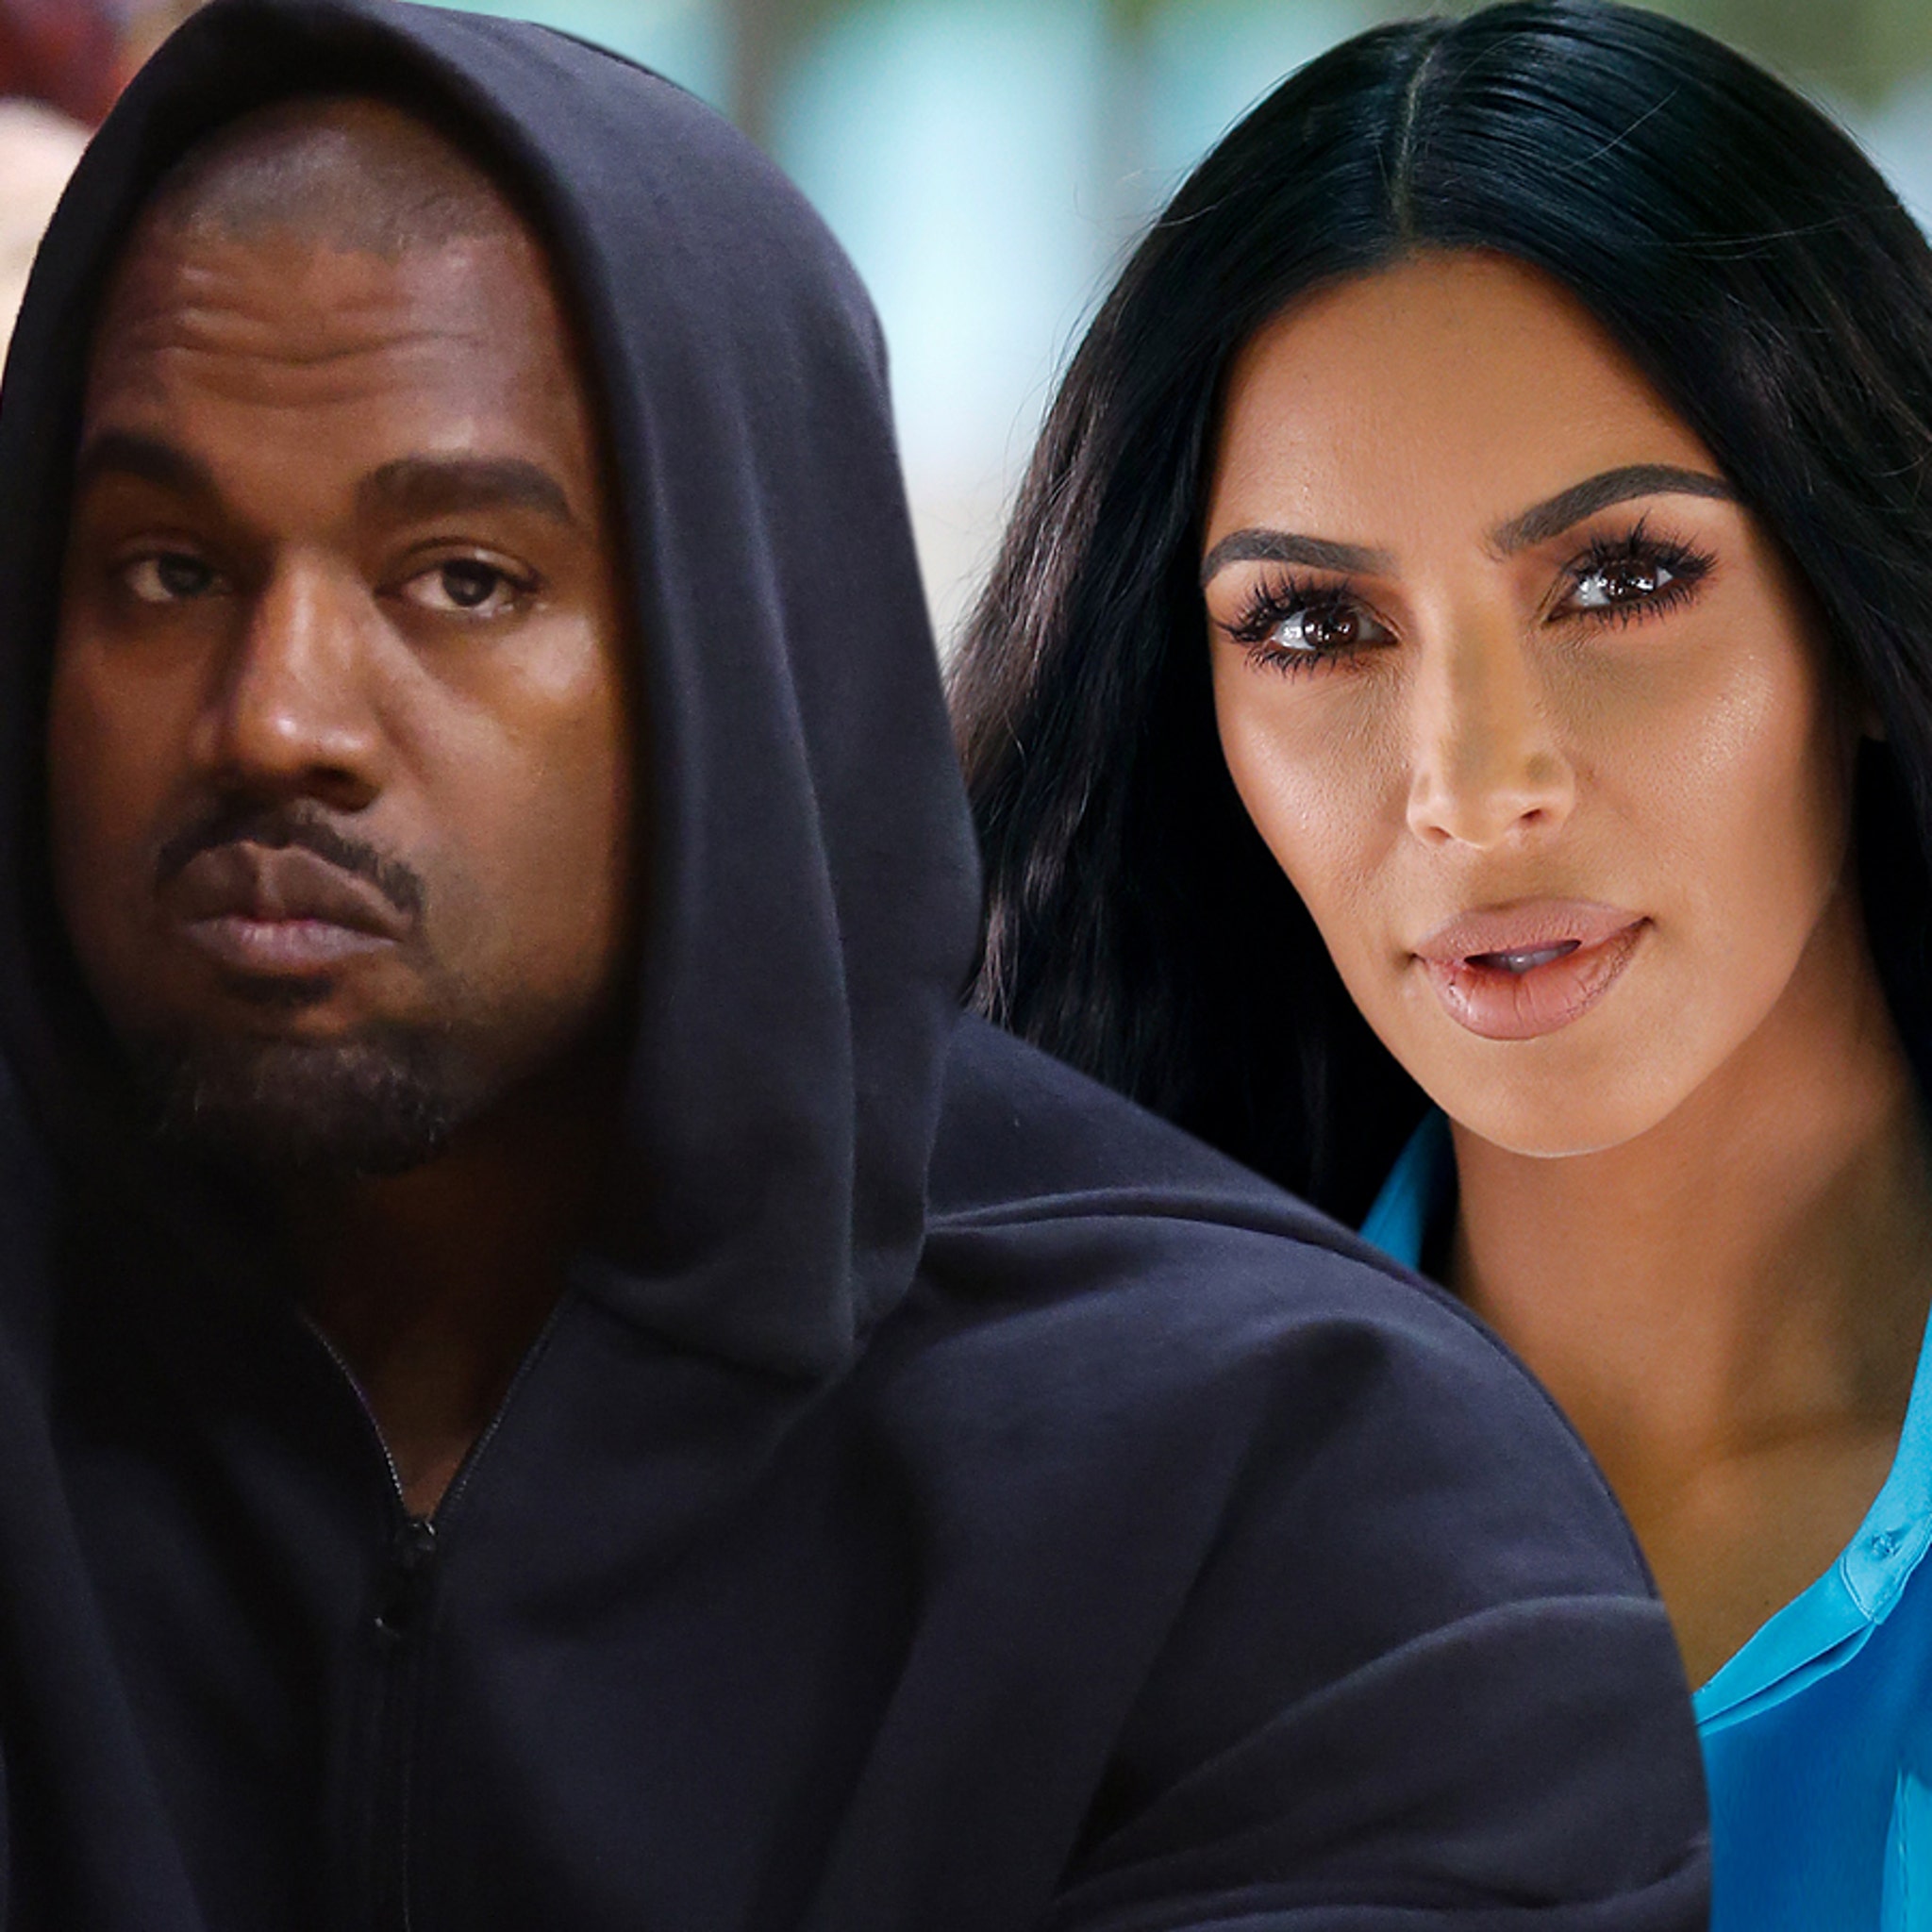 Mom Change Tres Son Watch After Fuck - Kanye West Goes After Kim Kardashian and Family, Calls Himself a Sperm Donor